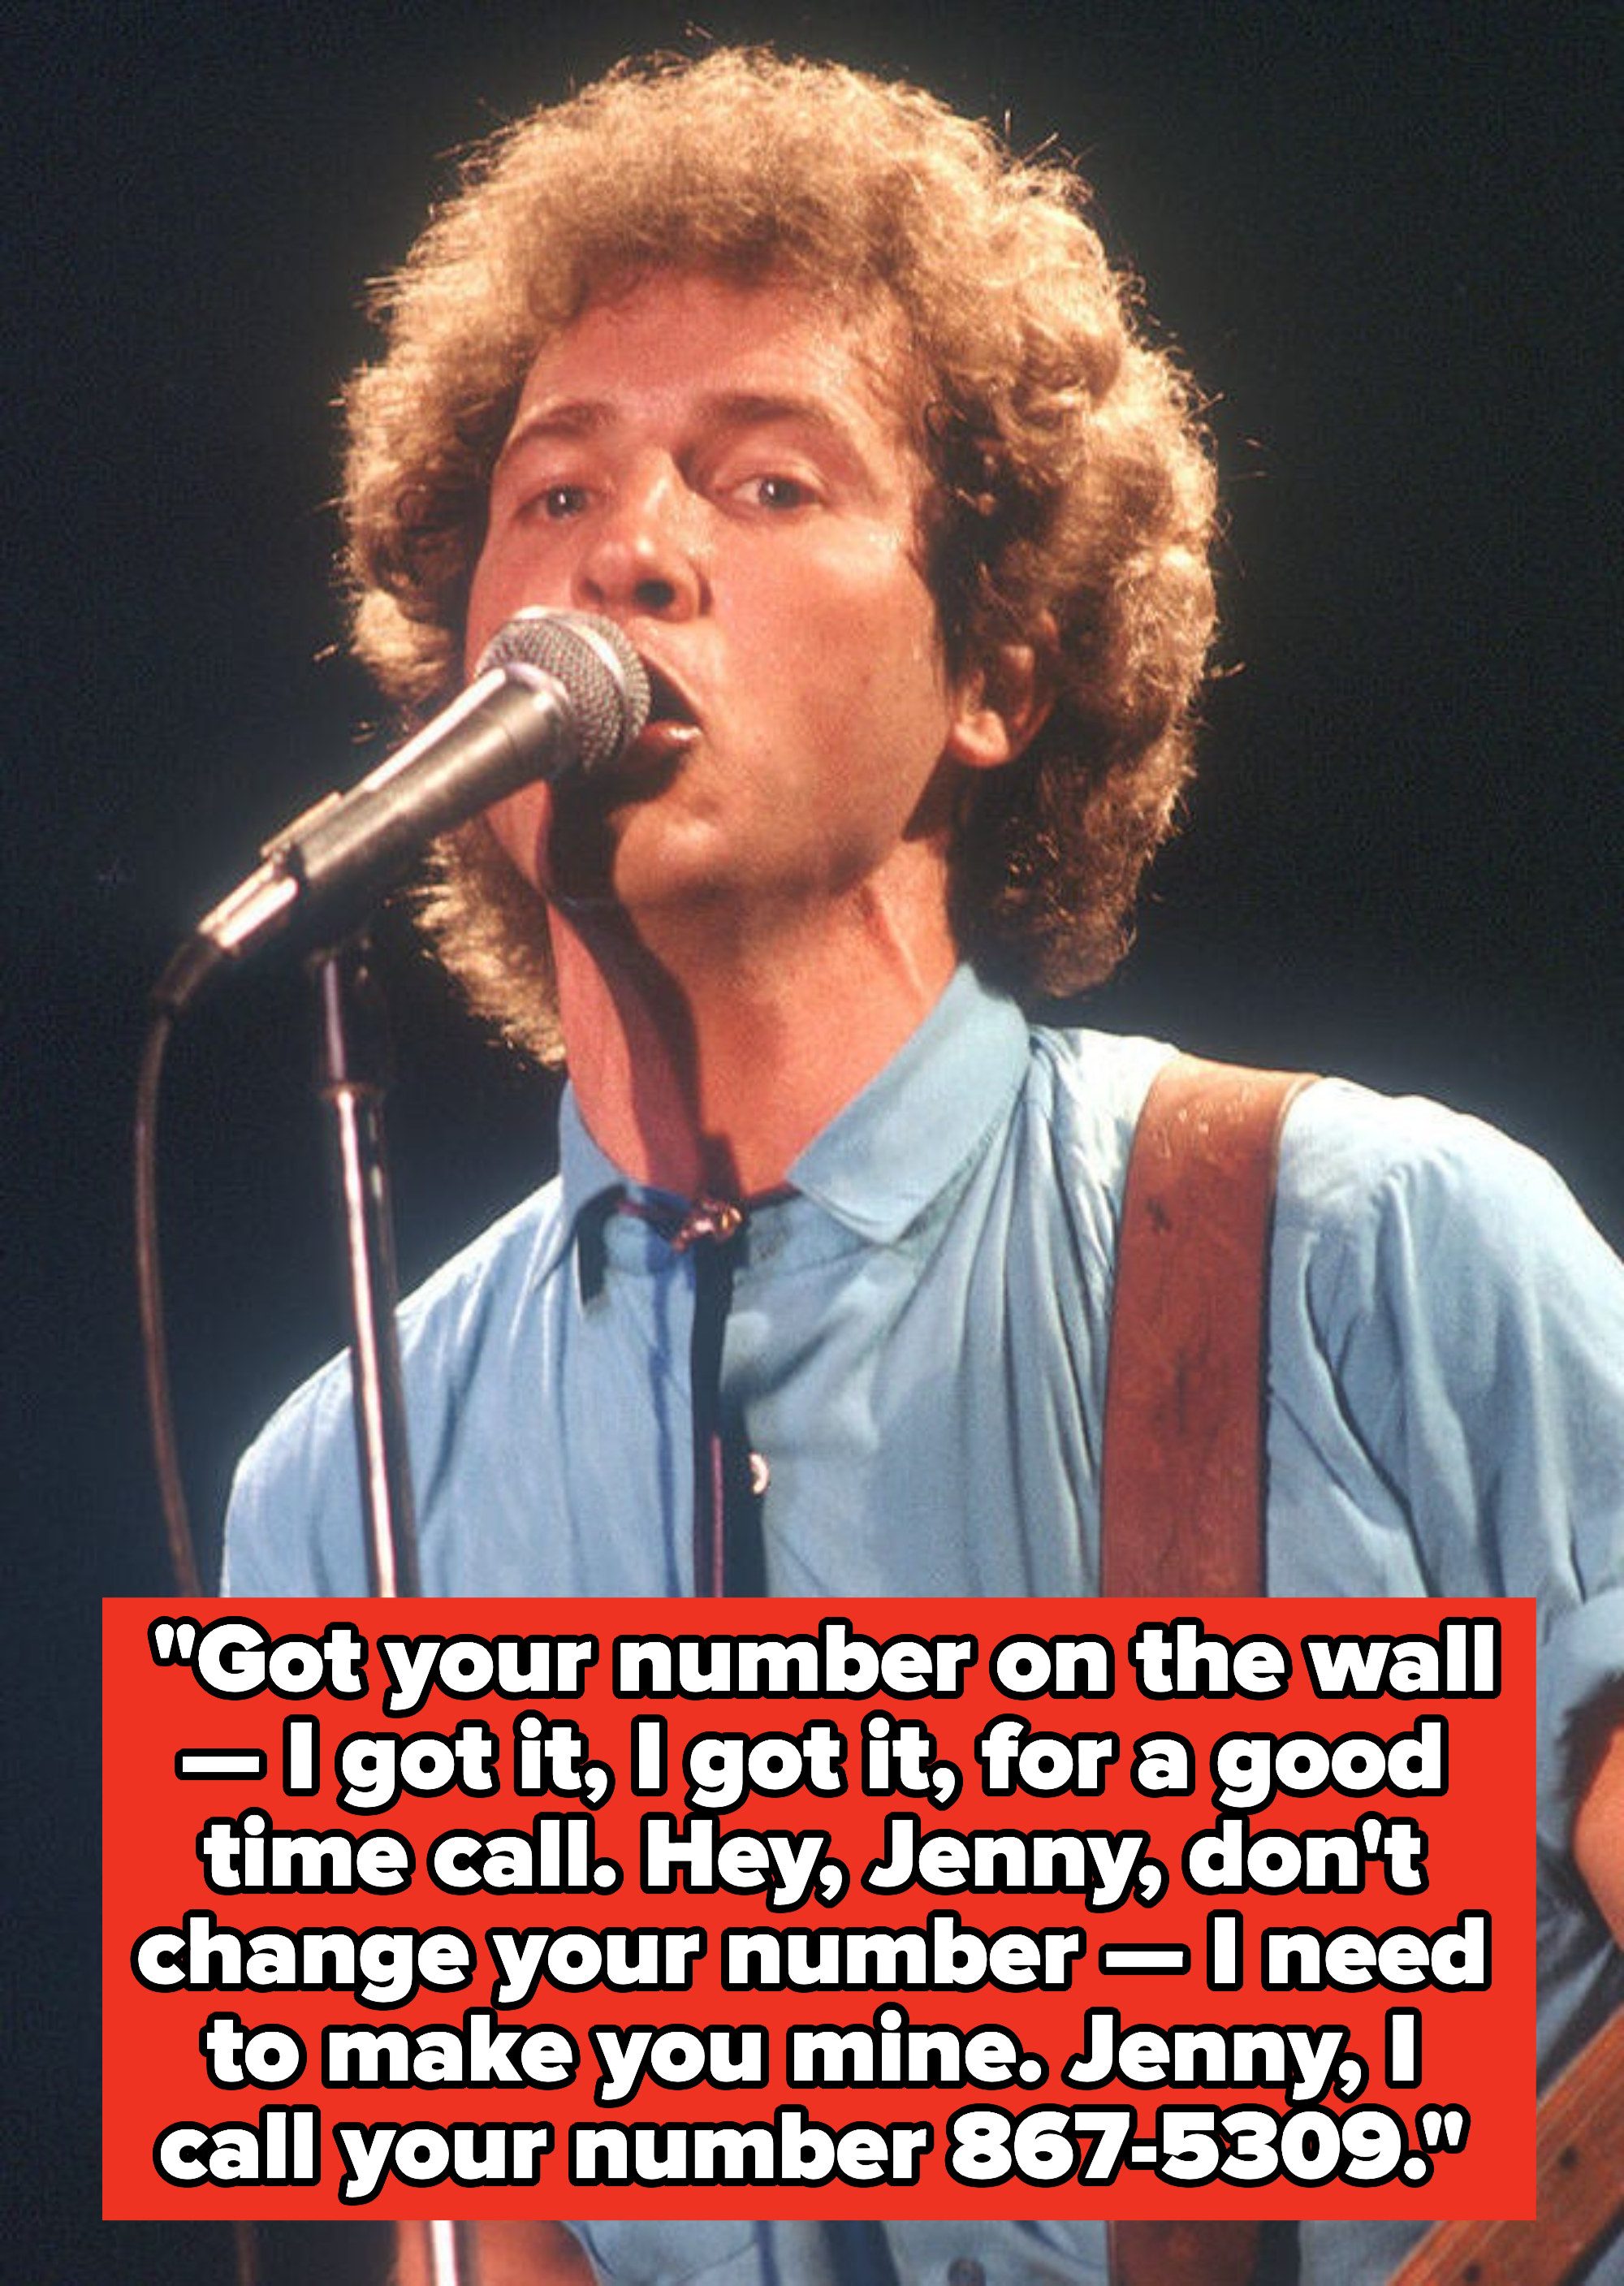 Tommy Tutone lyrics: &quot;Got your number on the wall — I got it, I got it, for a good time call. Hey, Jenny, don&#x27;t change your number — I need to make you mine. Jenny, I call your number 867-5309&quot;